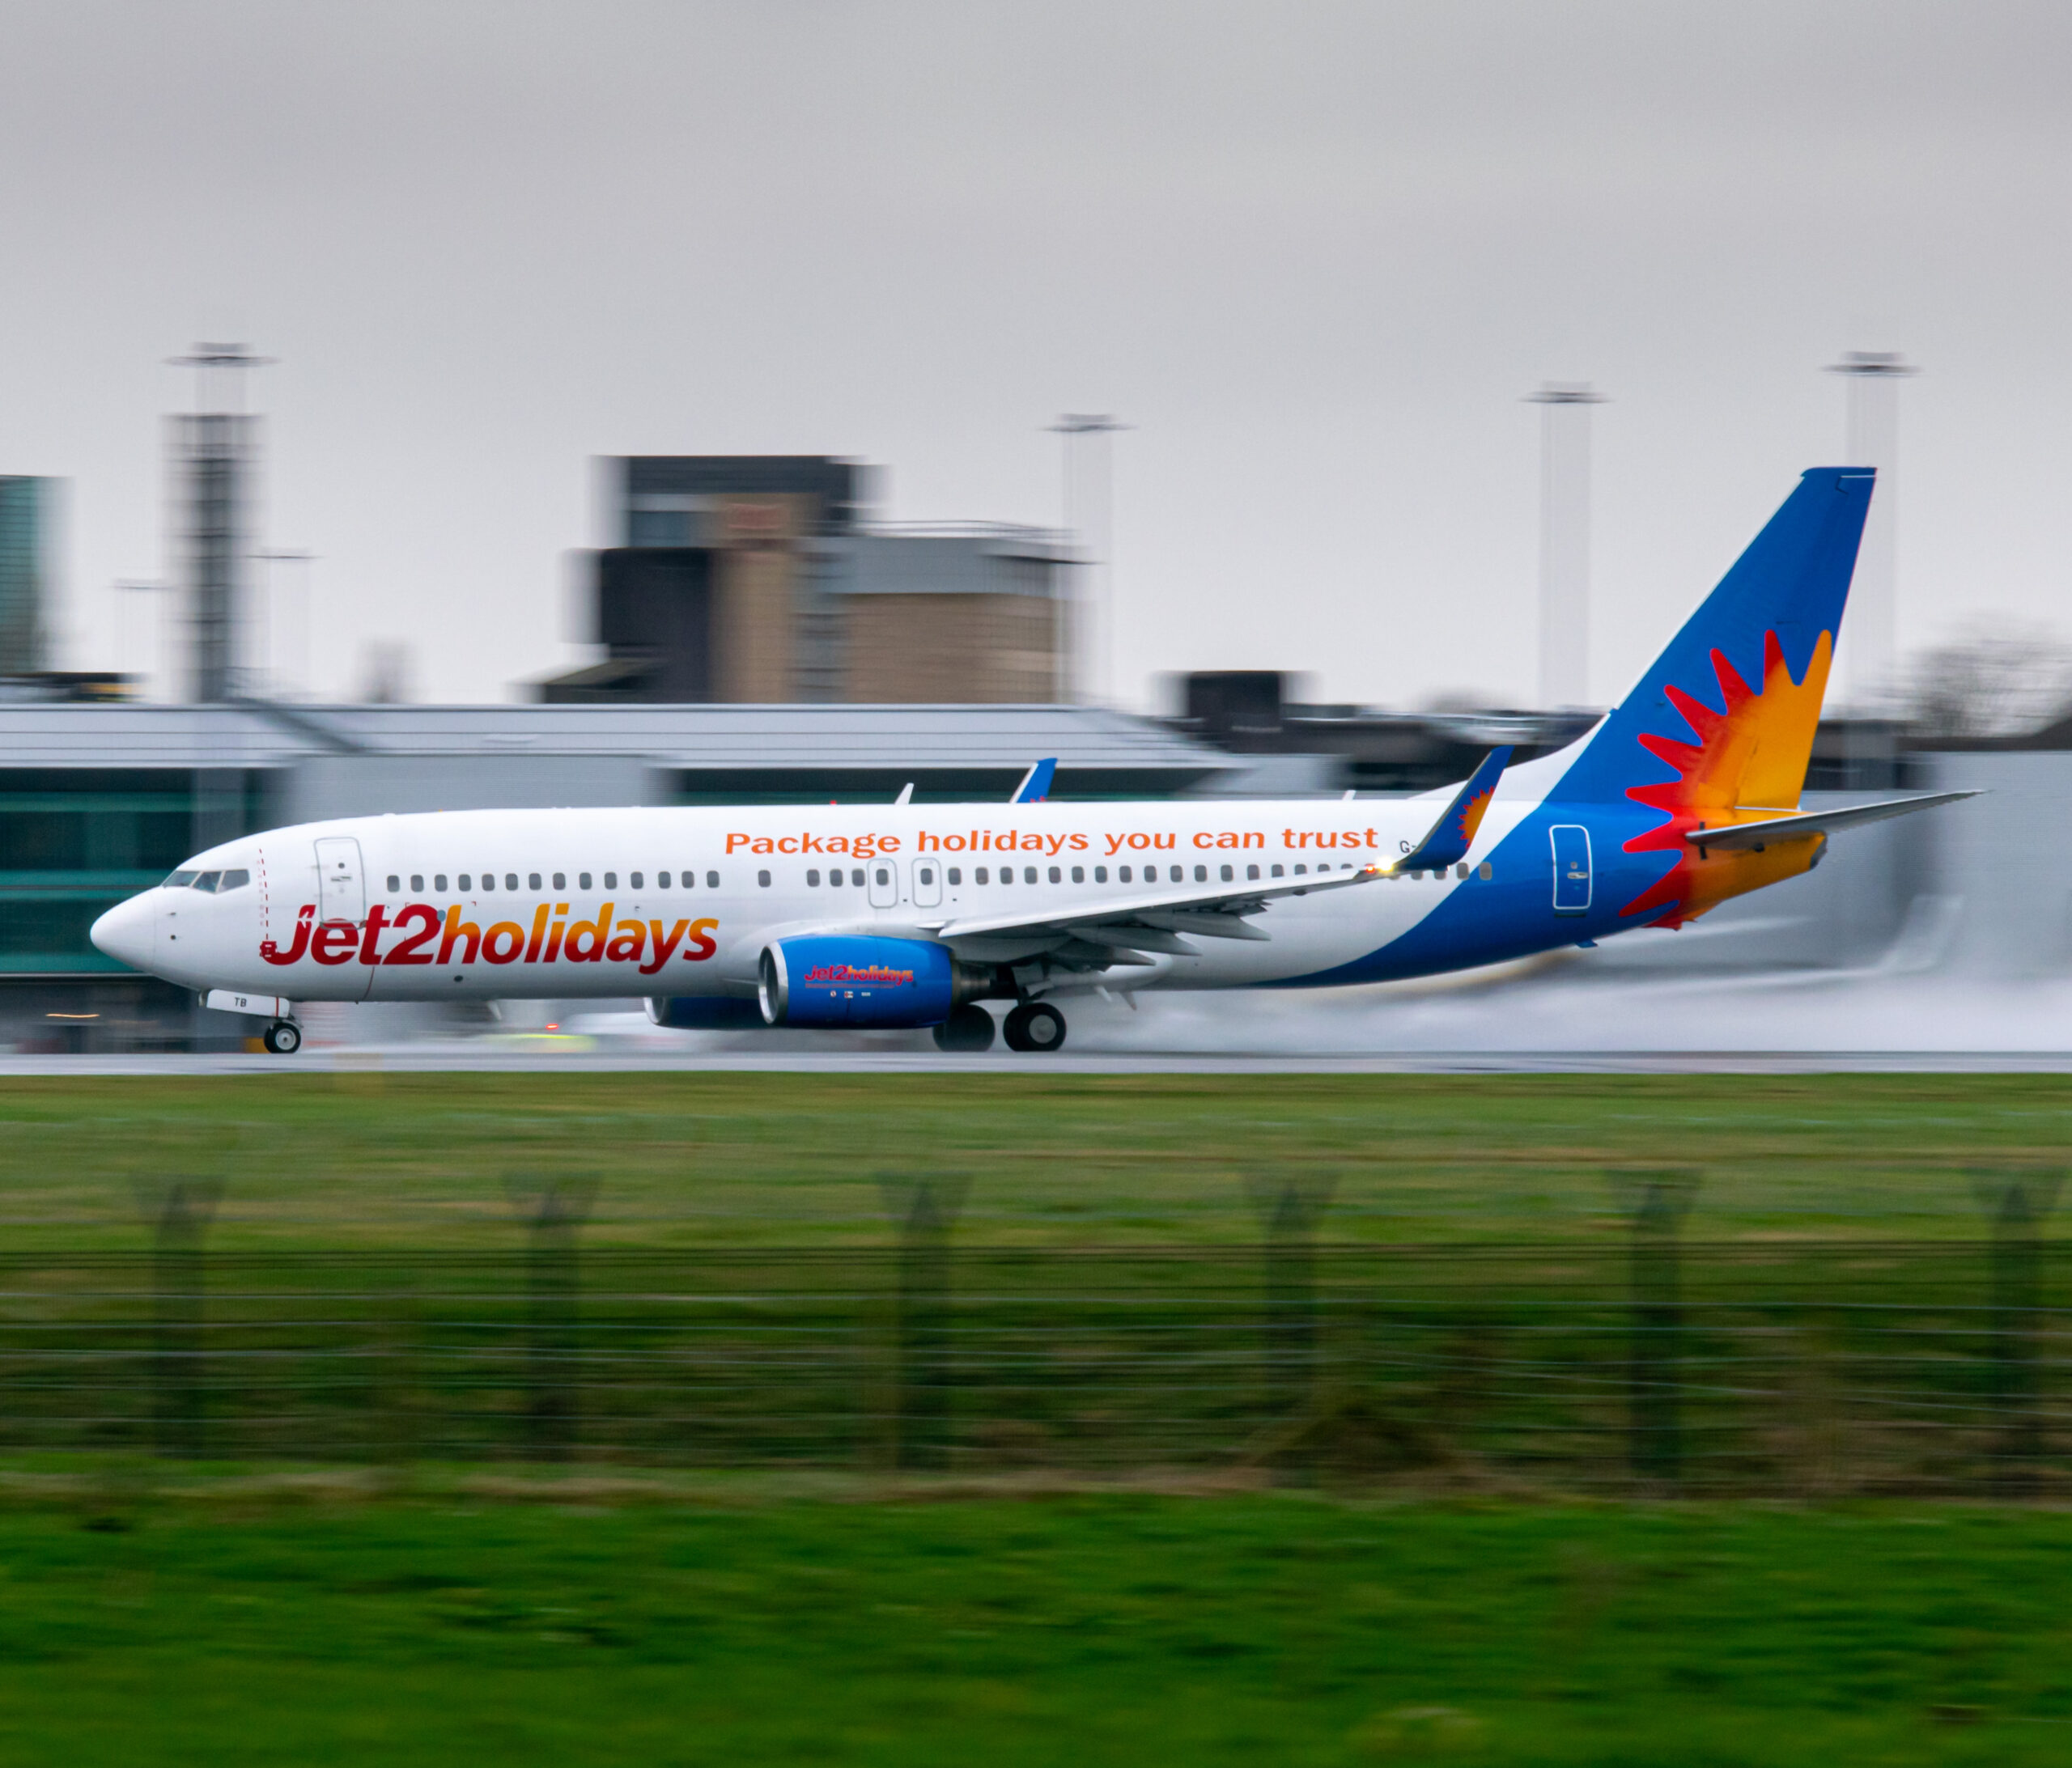 AAIB Releases Report on Jet2 Boeing 737-800 Incident